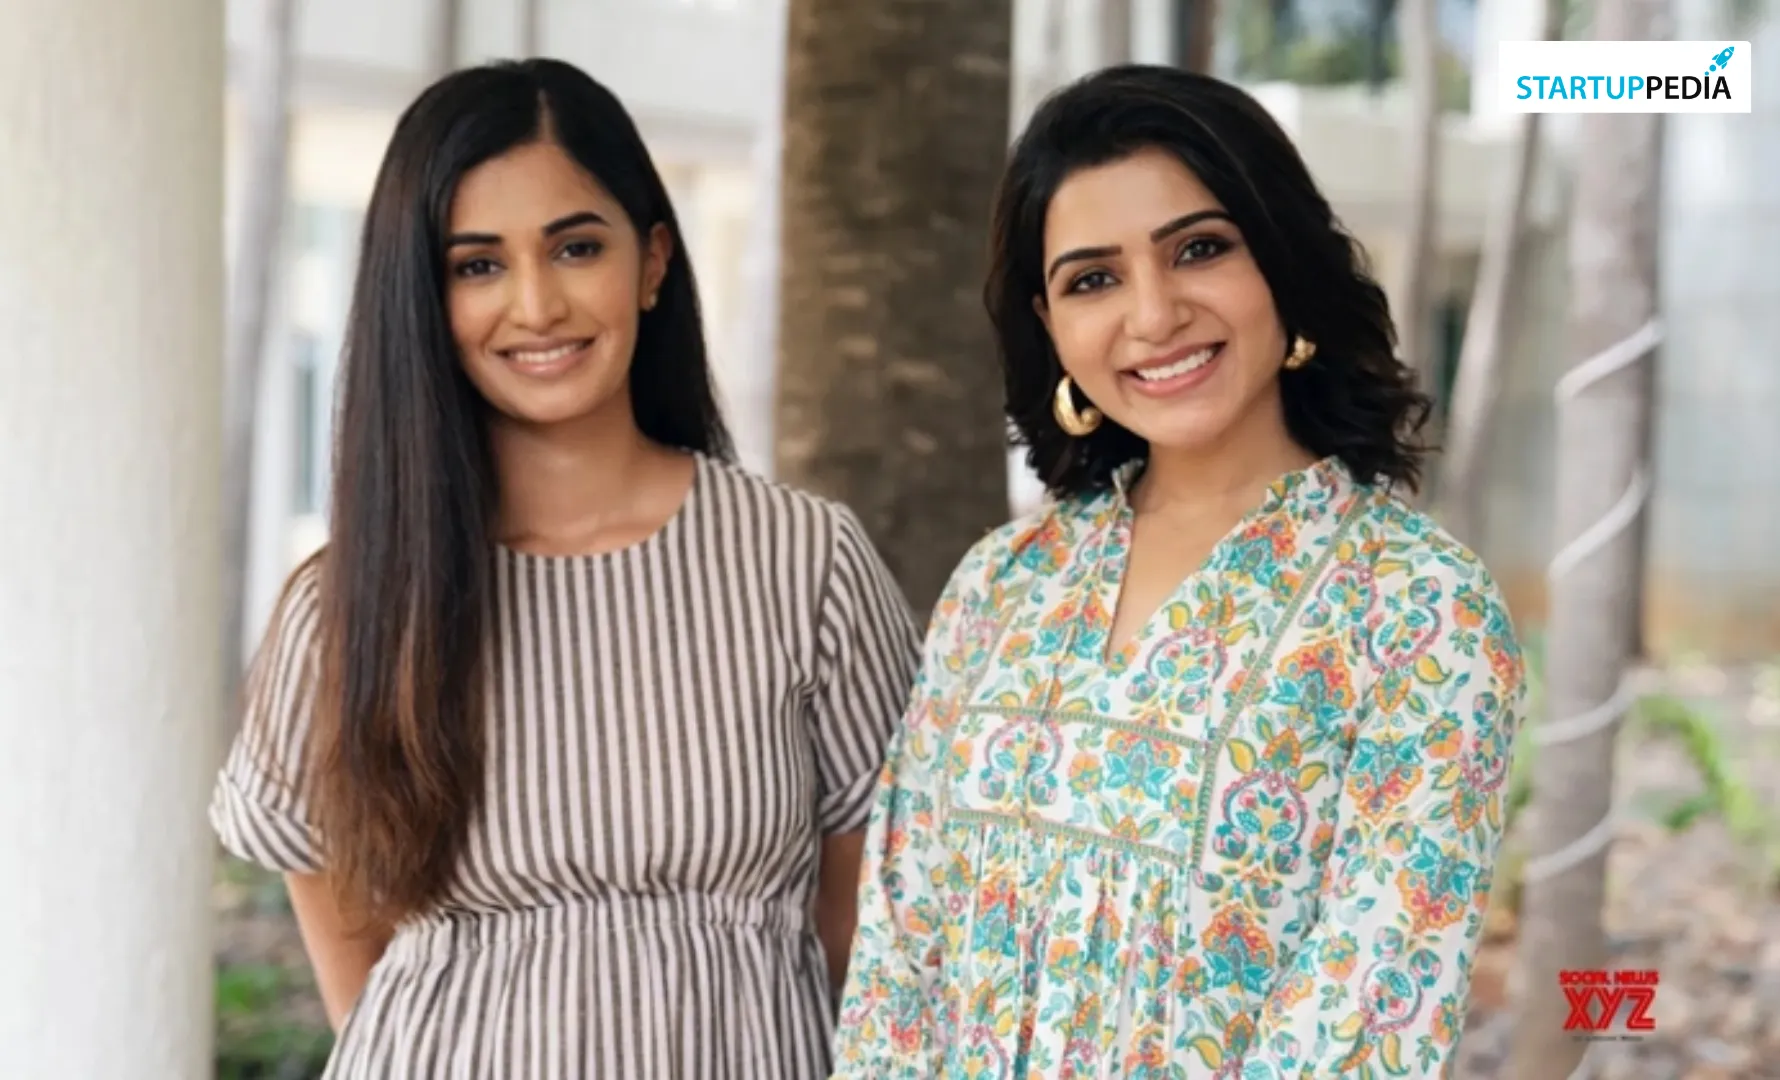 Actress Samantha’s and Model Sushruthi’s Ethnic Wear Brand is Getting a Global Attention